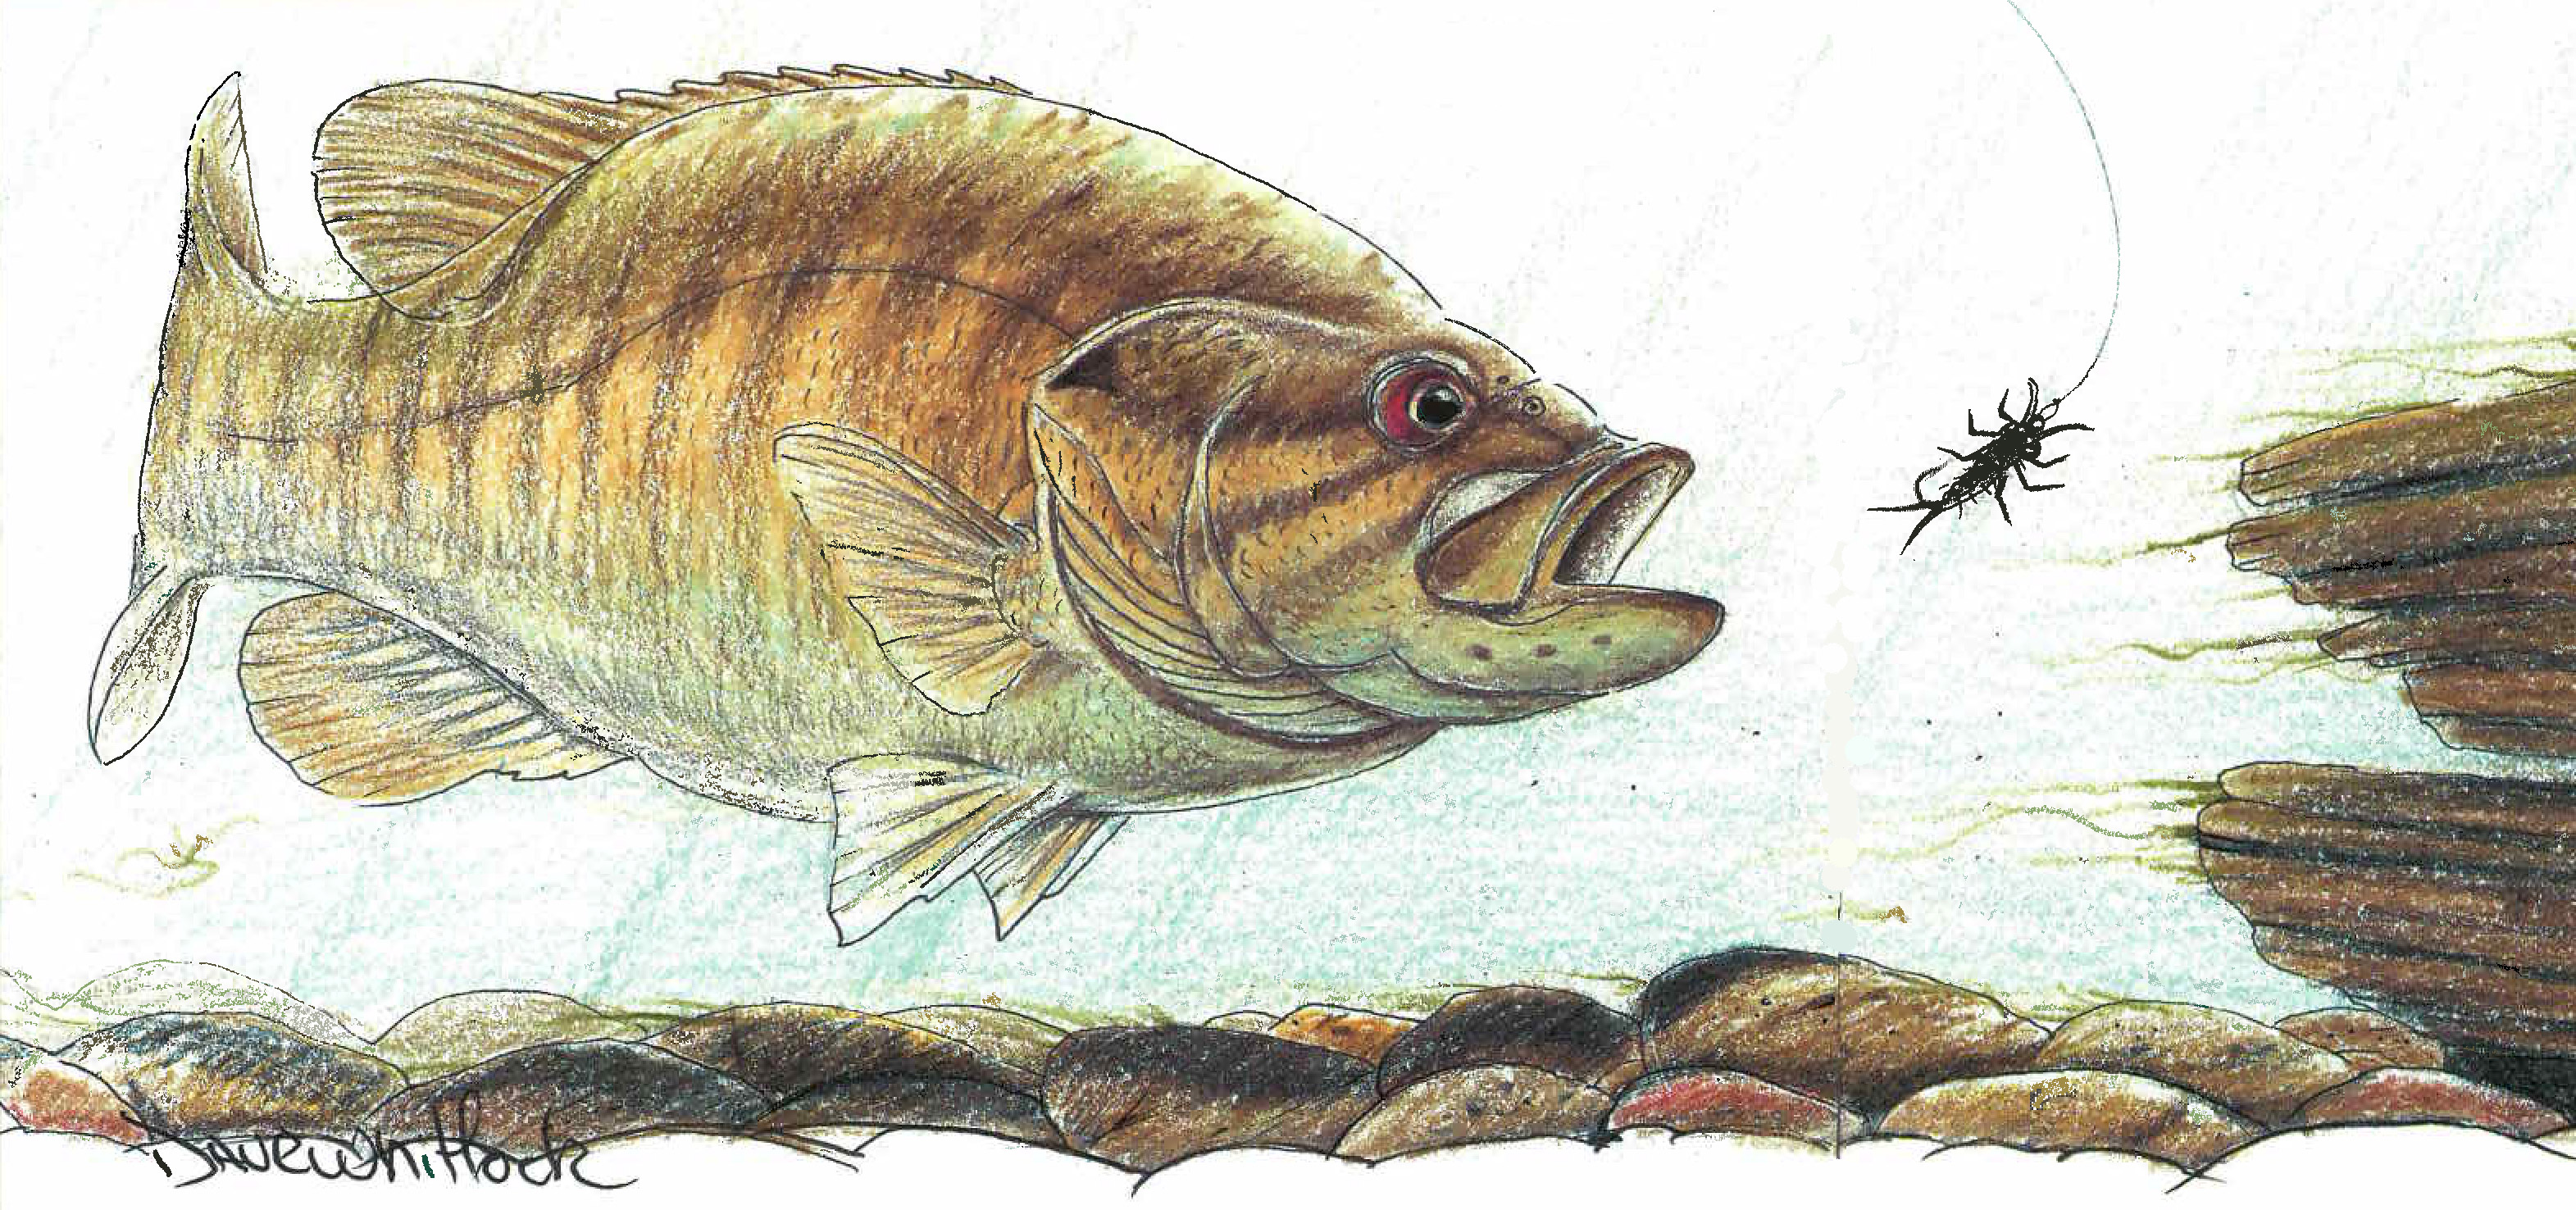 Nymphing for Smallmouth Bass